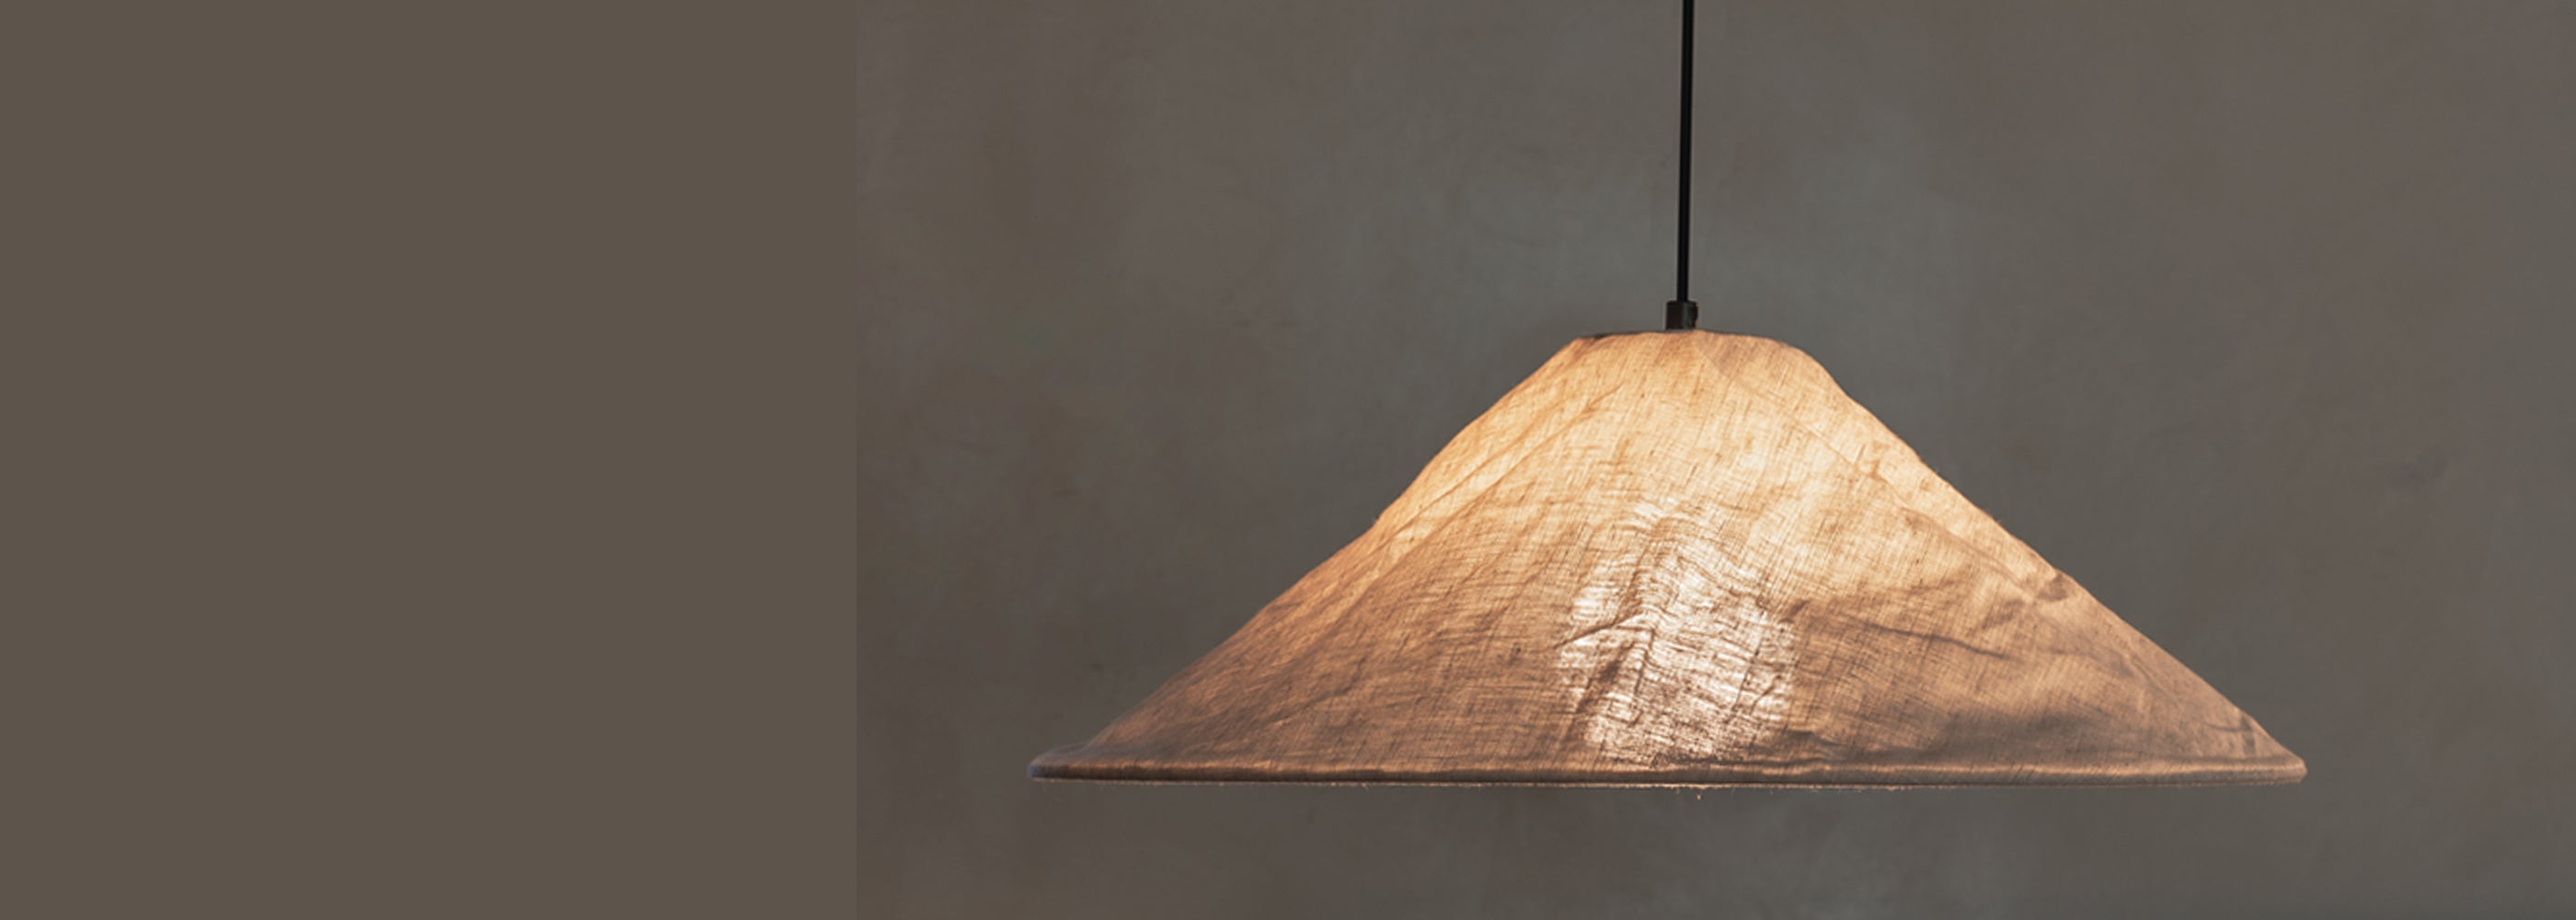 Buy from Lights & Lamps | Lightsandlamps.com - Lampshades - Free Delivery